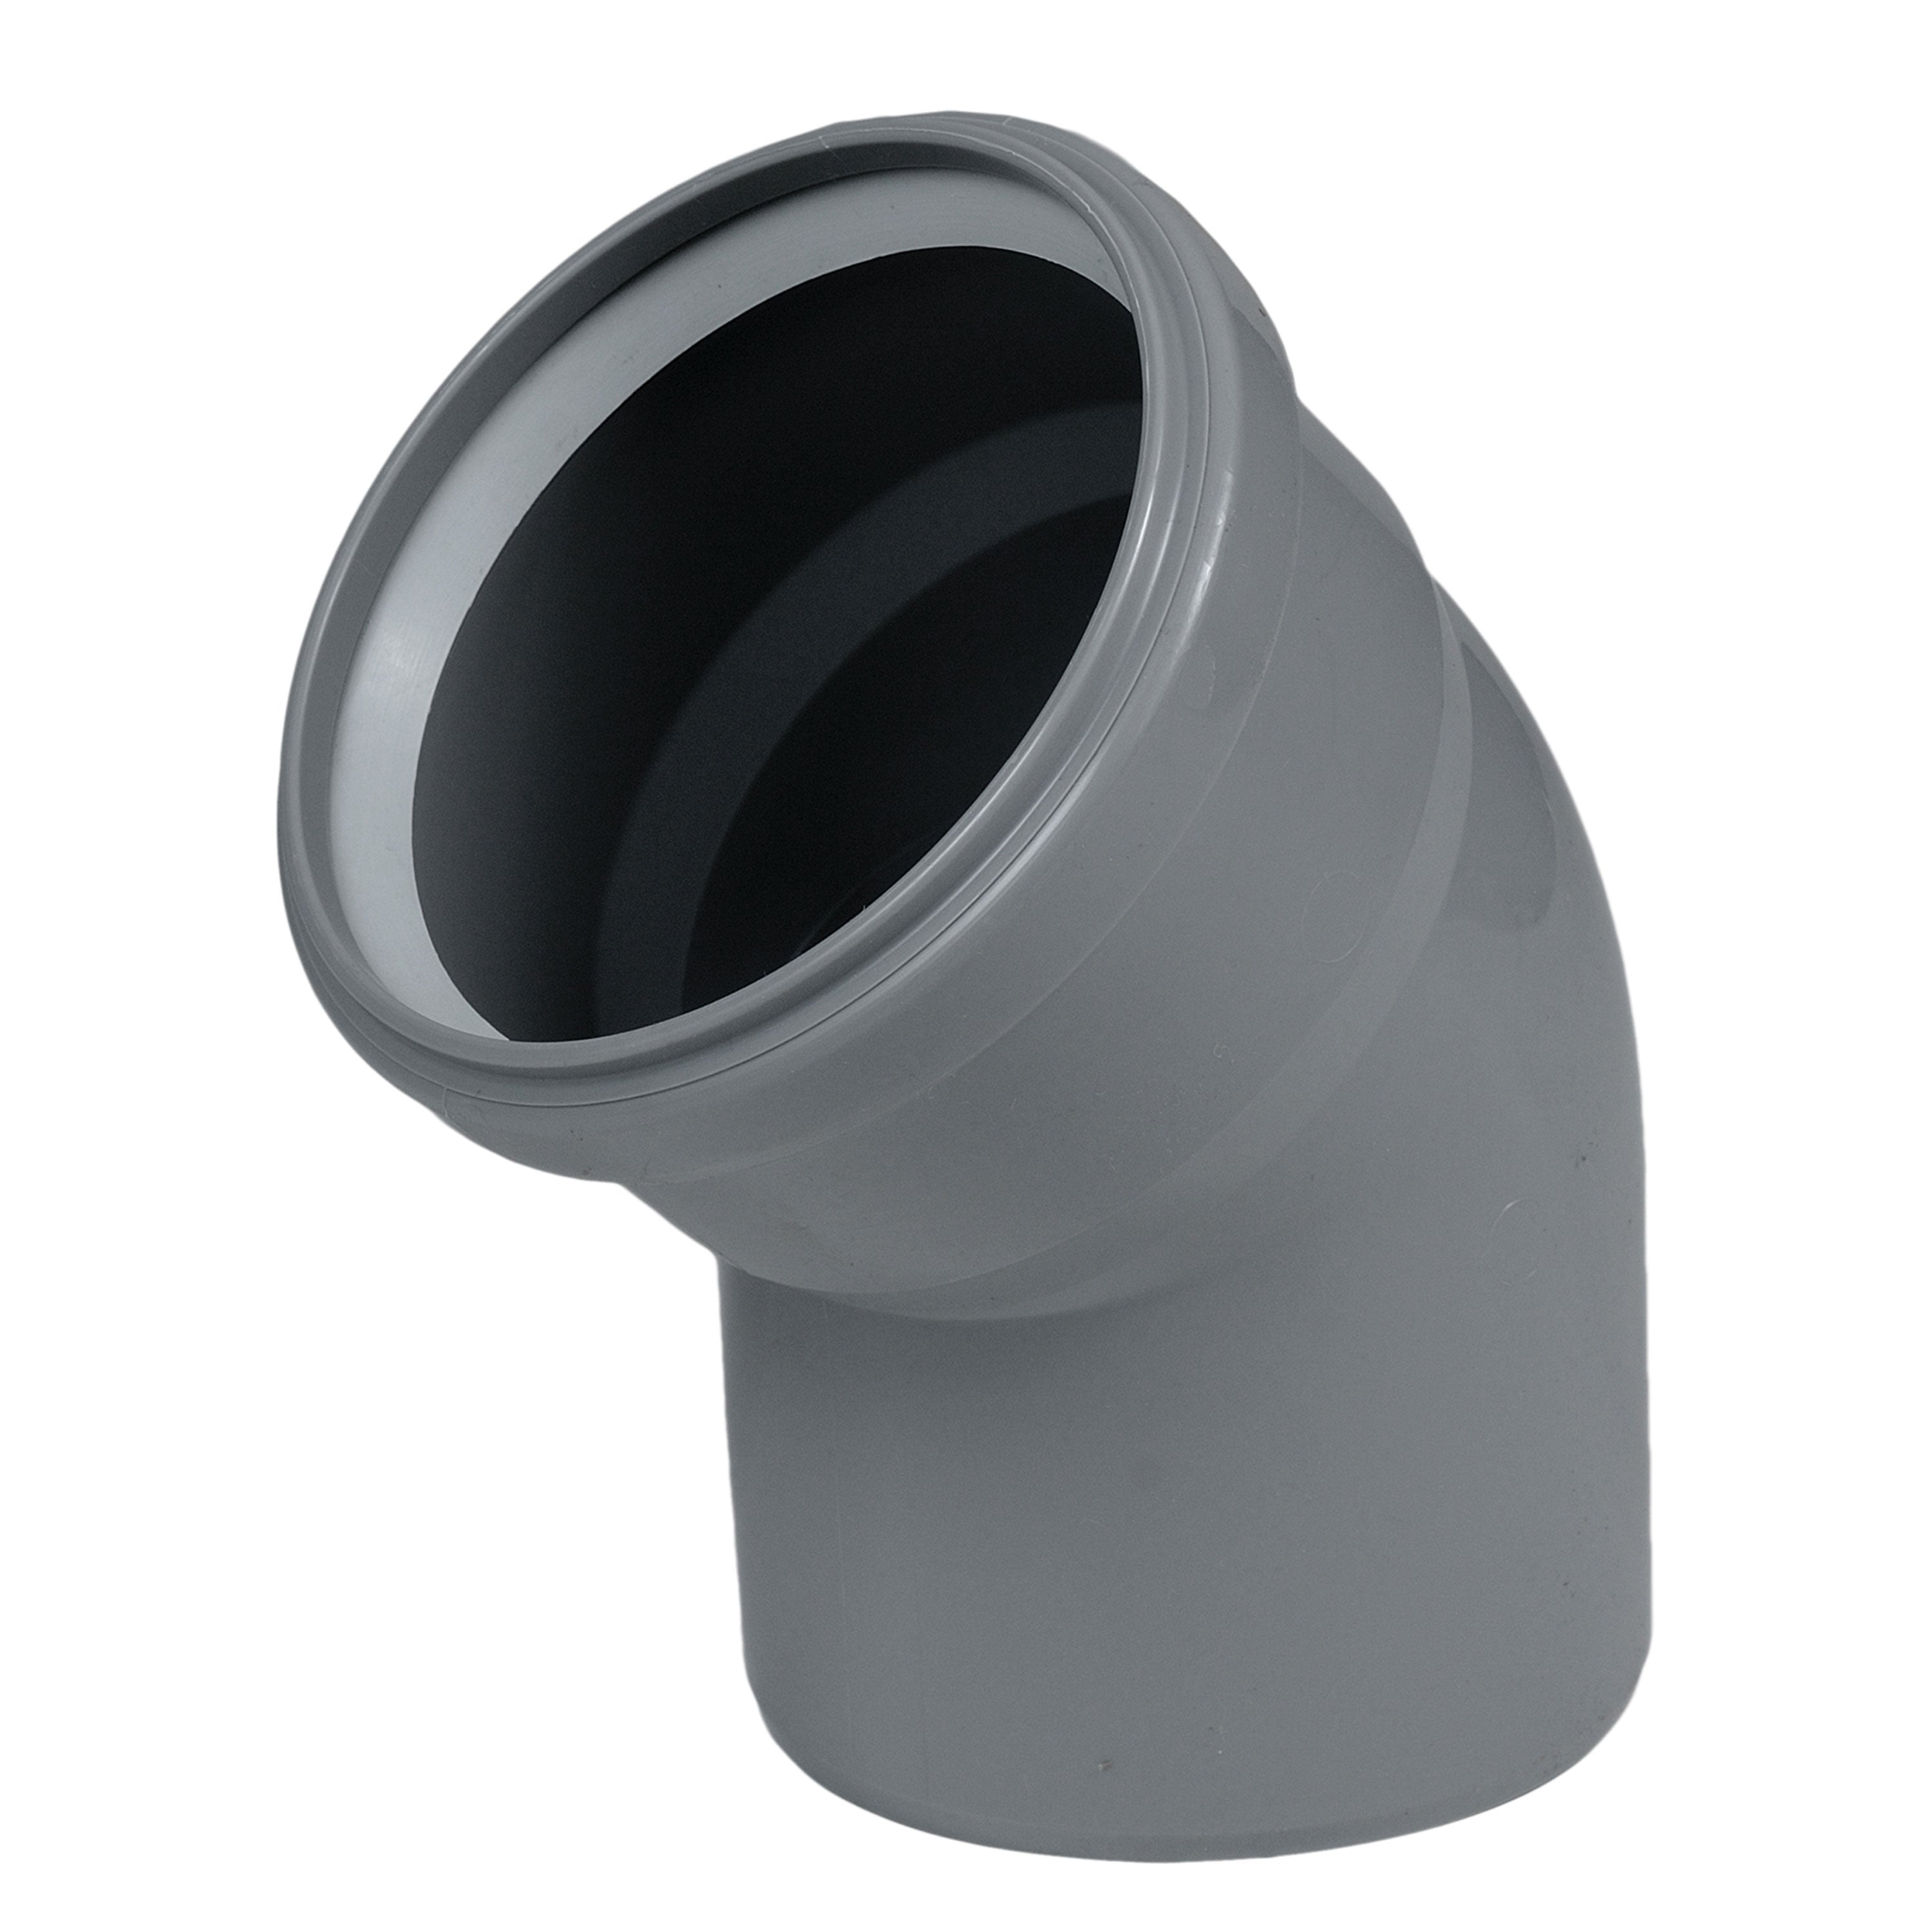 Centrotherm ISELL0445 InnoFlue Residential SW Gray Long Elbow - 45 Degree, 4 in. Diameter ISELS0445